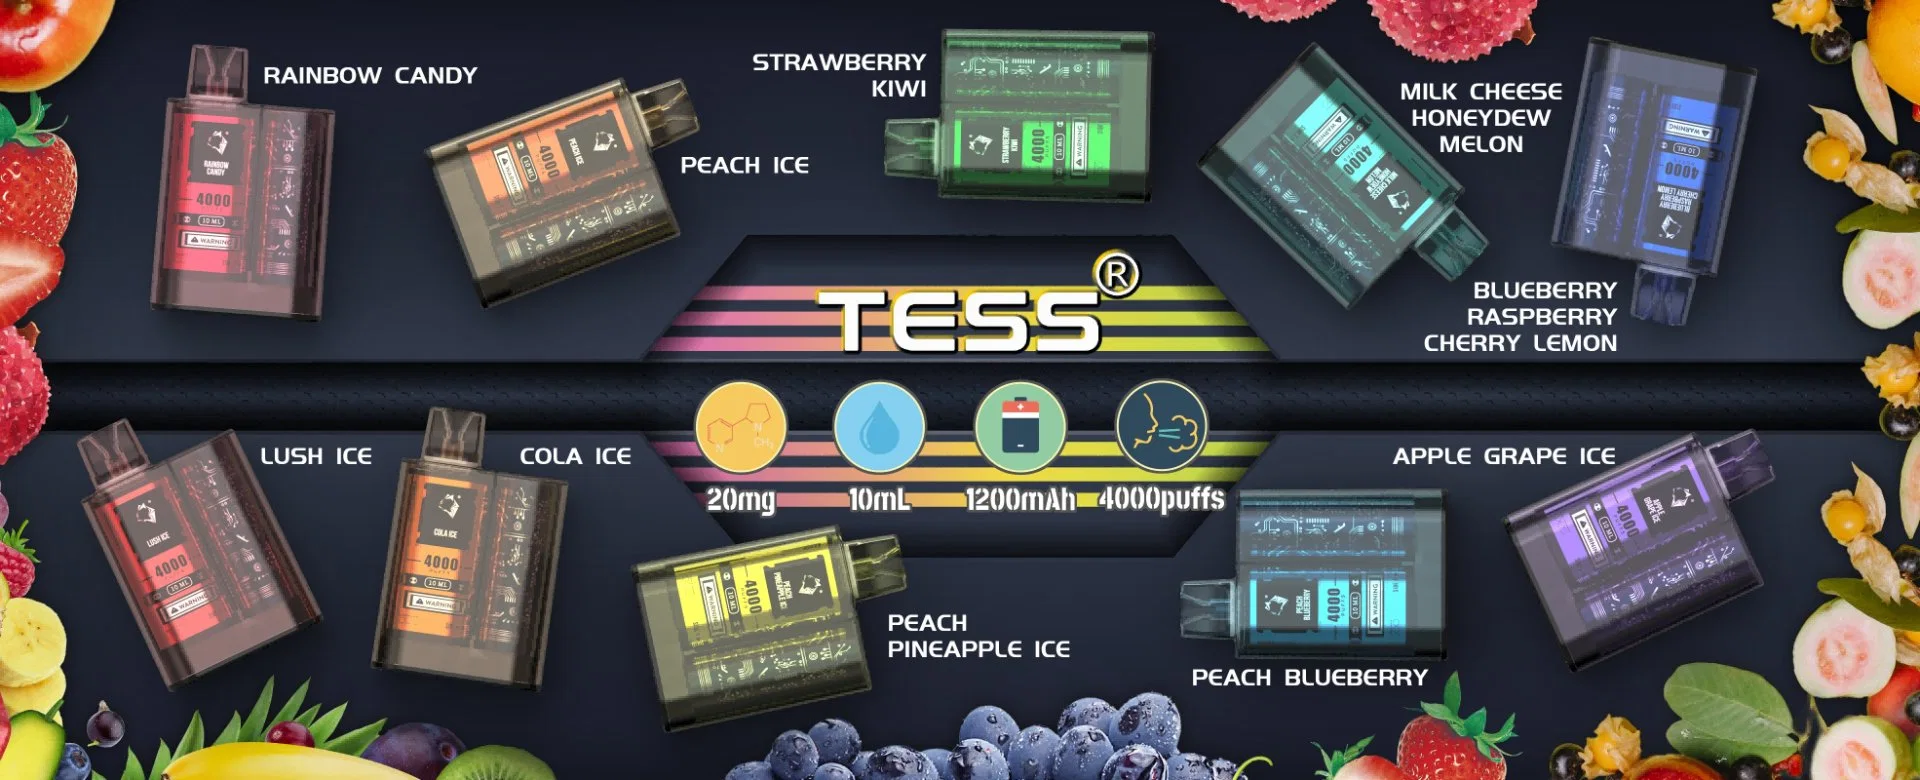 Tess Mod The World First 2 Flavors in 1 Disposable Vape Pen